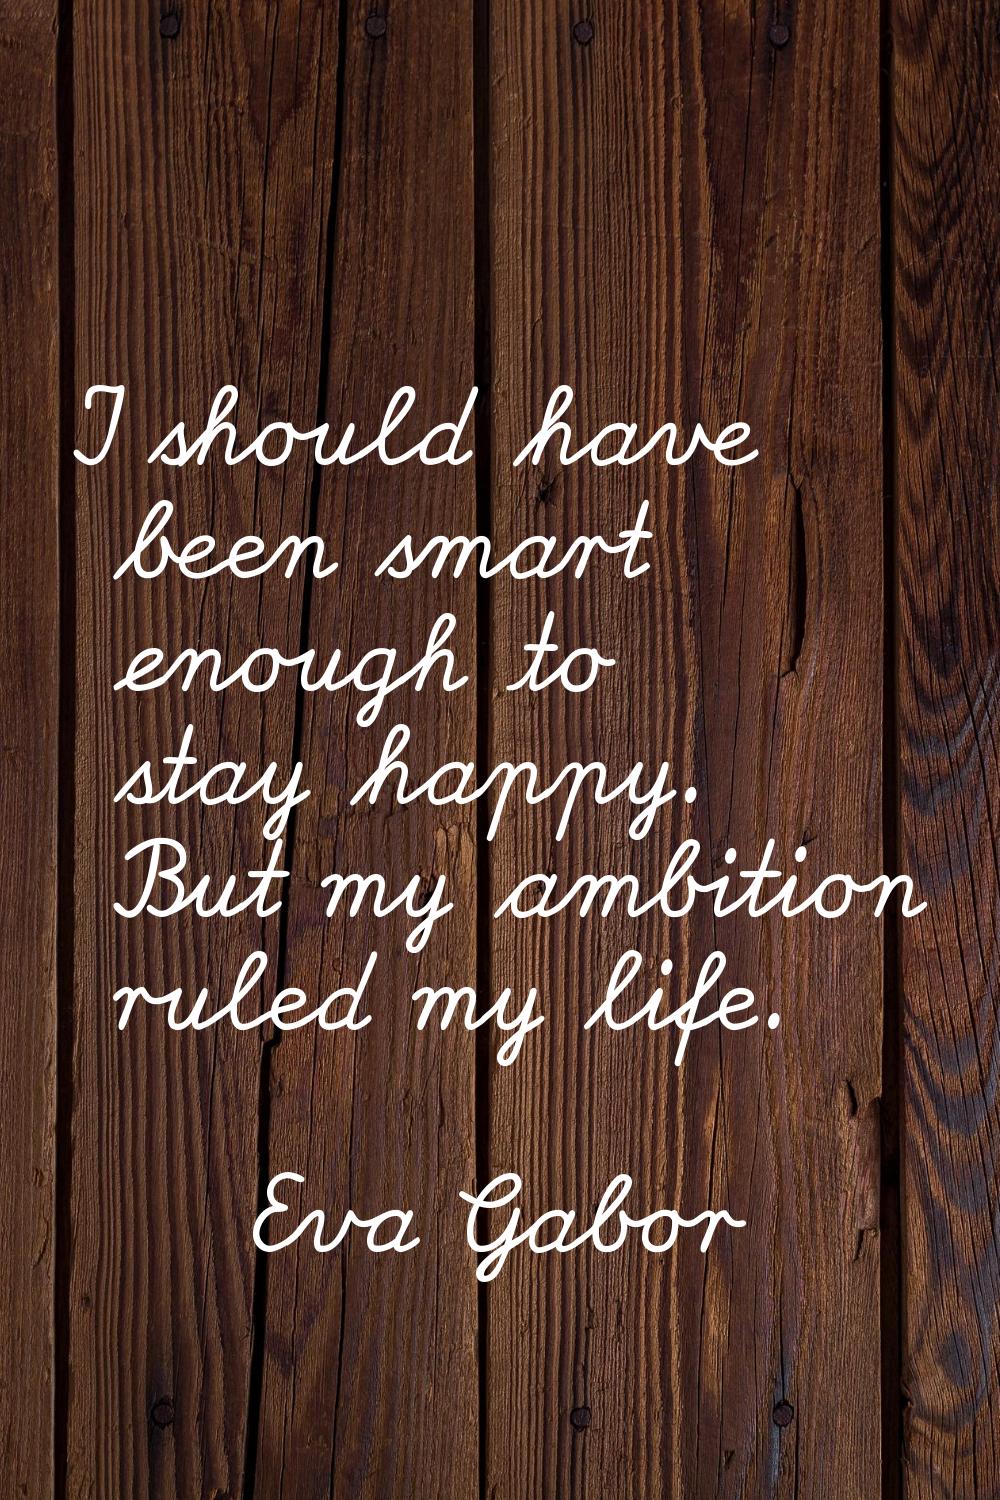 I should have been smart enough to stay happy. But my ambition ruled my life.